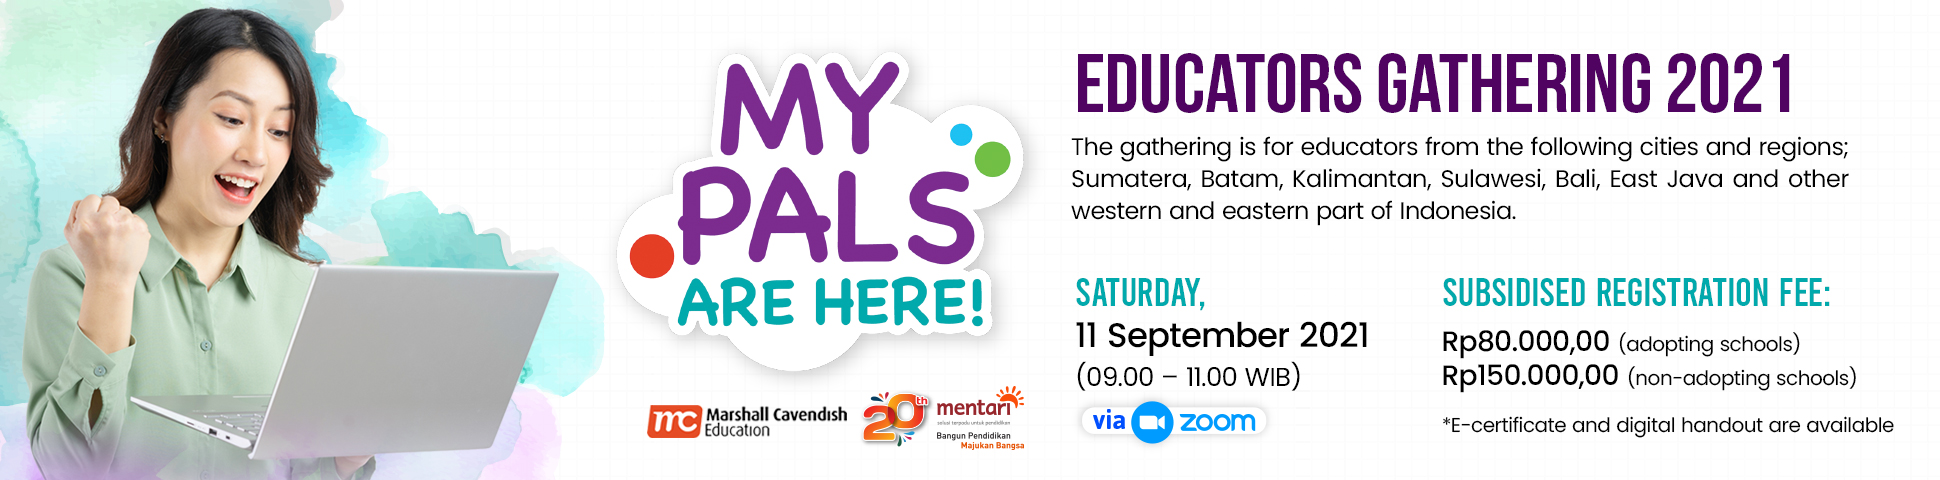 My Pals are Here! Educators Gathering - September 2021